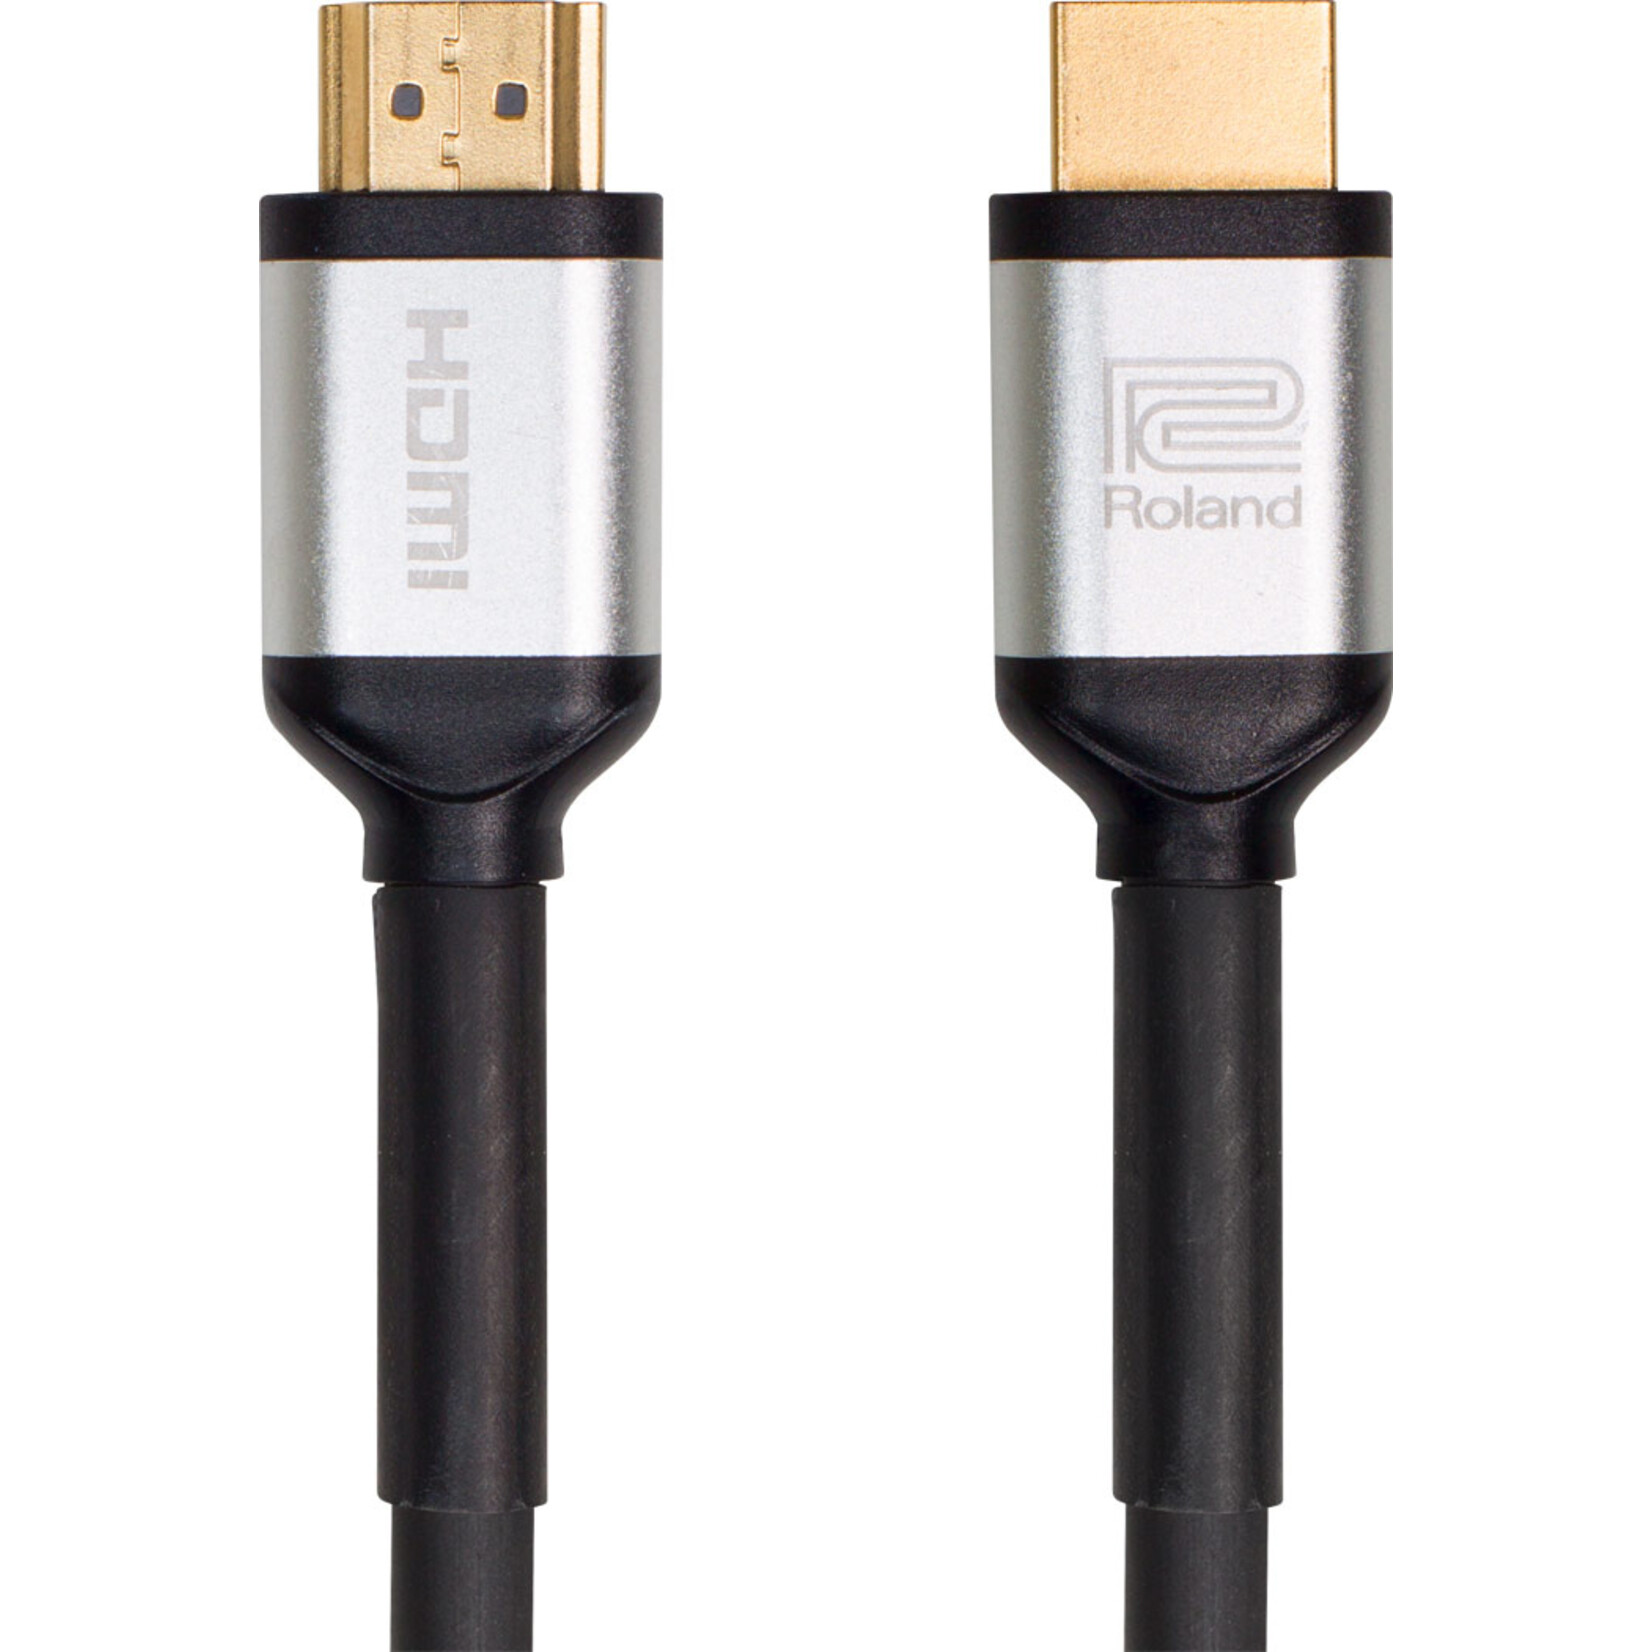 Roland Black Series HDMI 2.0 Cable - 25 Ft